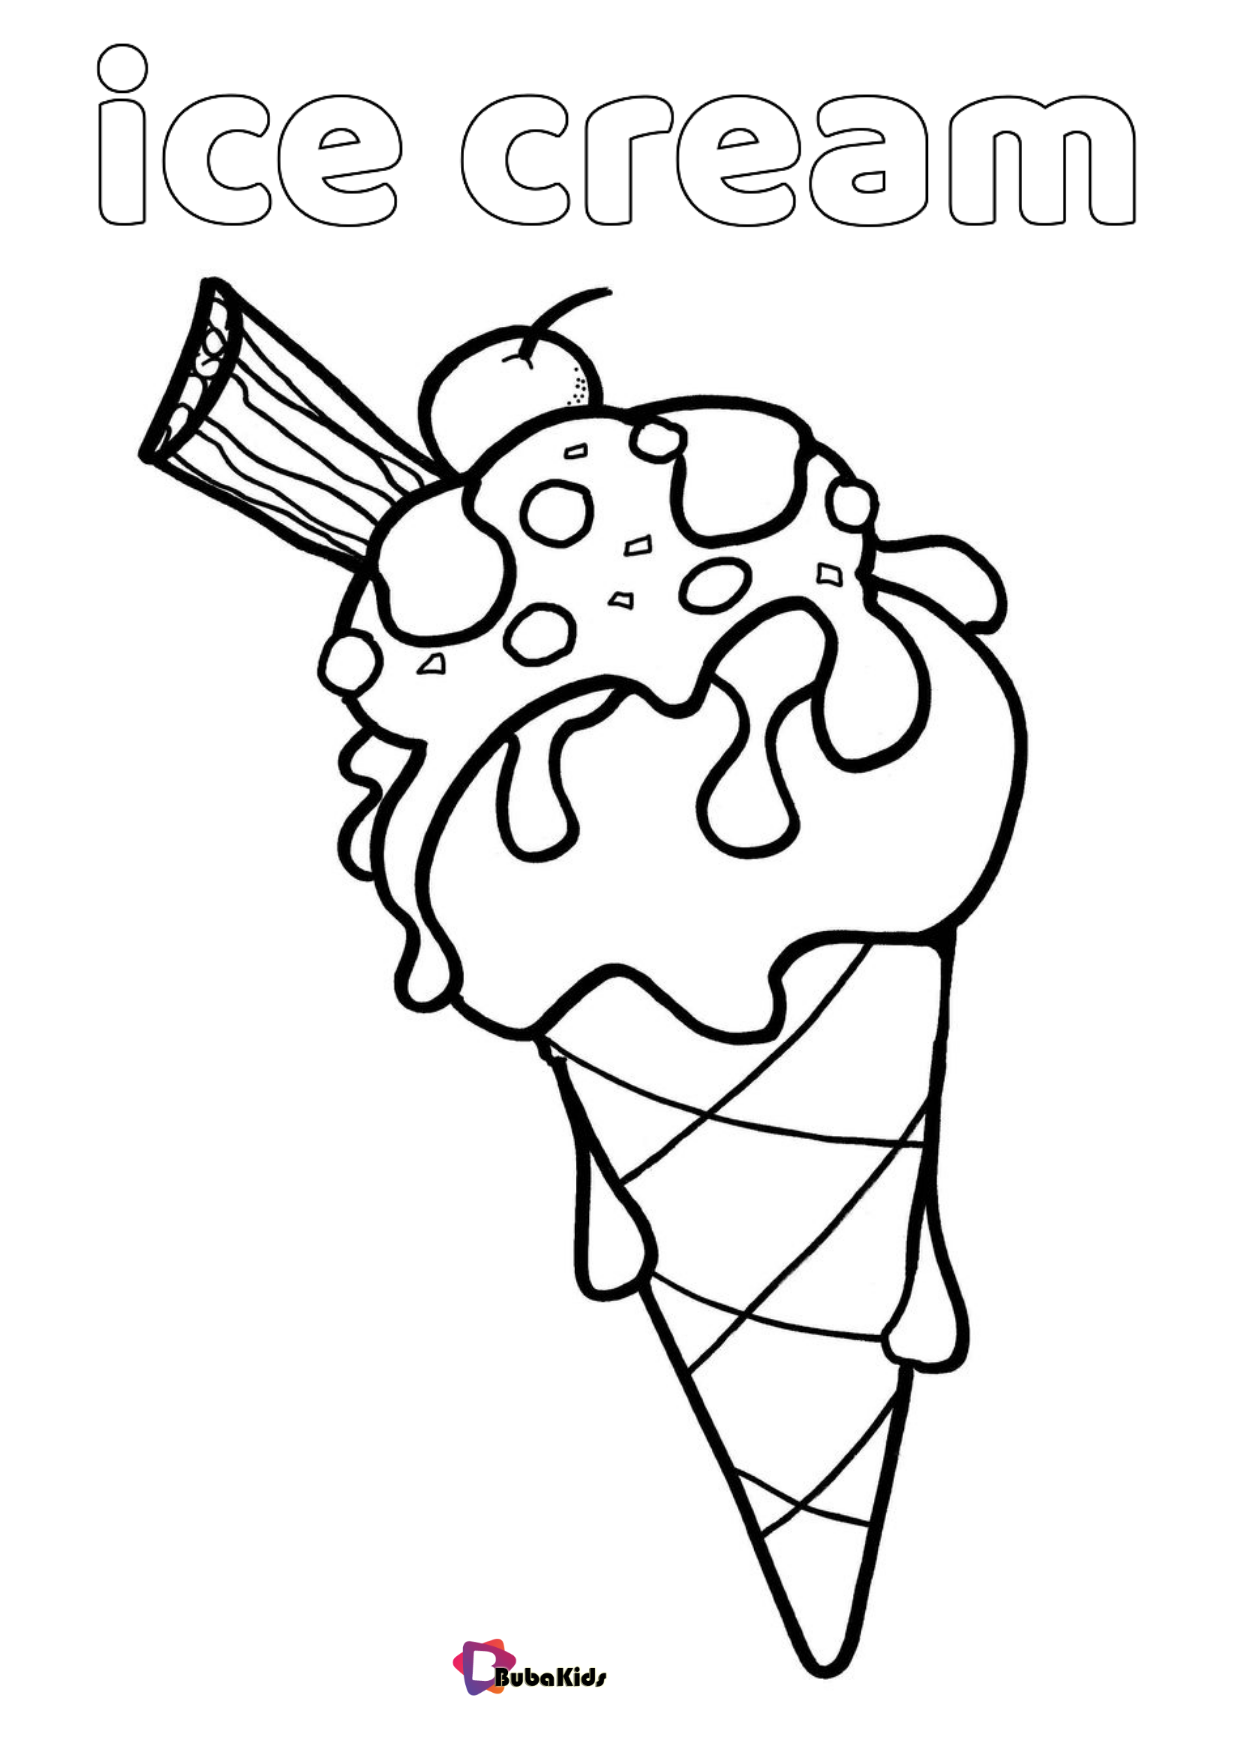 Free download and printable Ice Cream coloring page Wallpaper